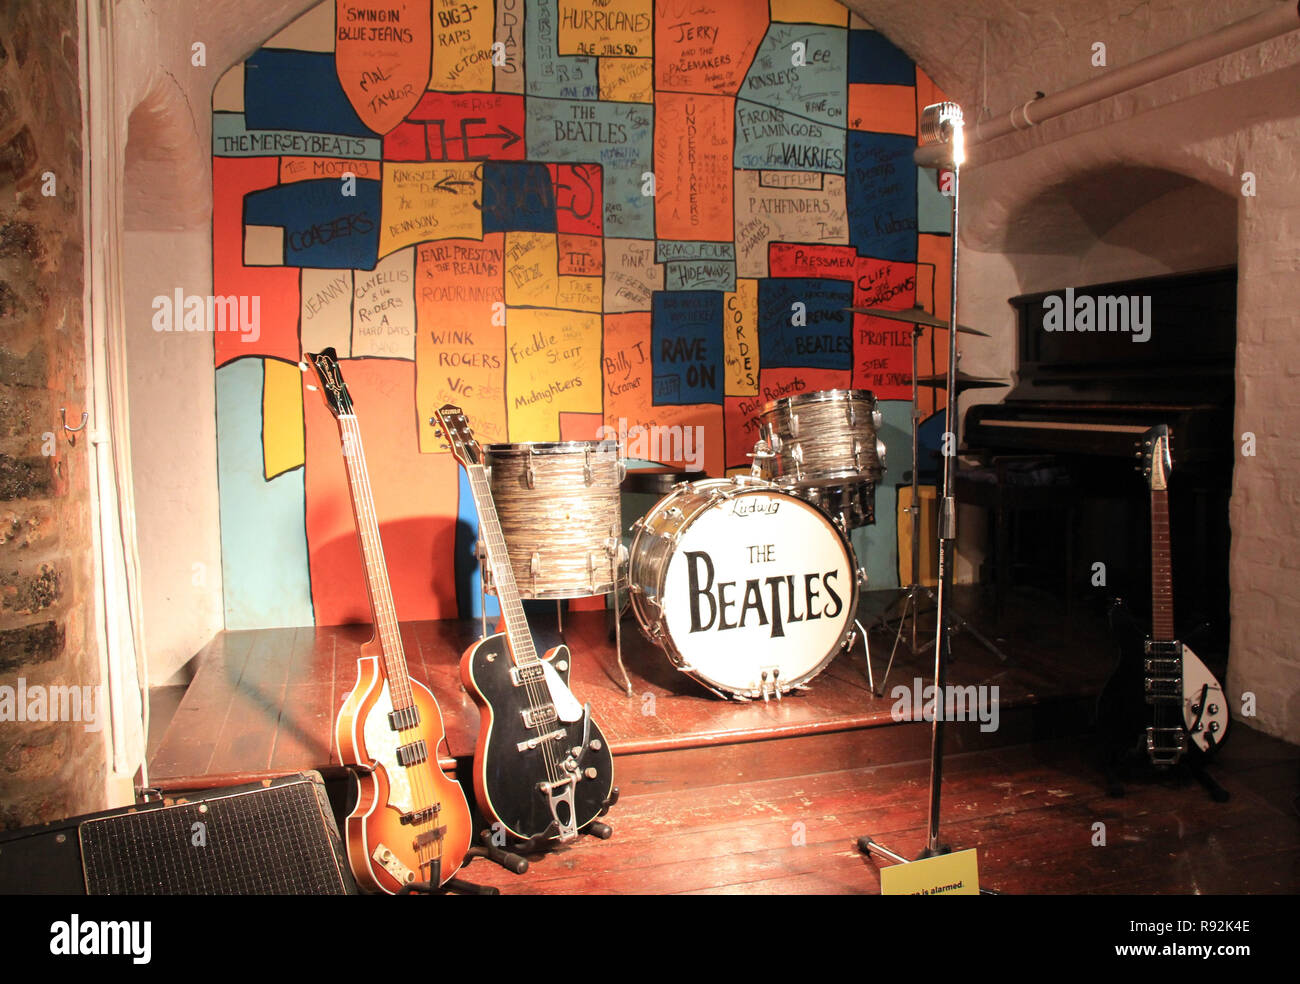 The Cavern Club Stage High Resolution Stock Photography and Images - Alamy